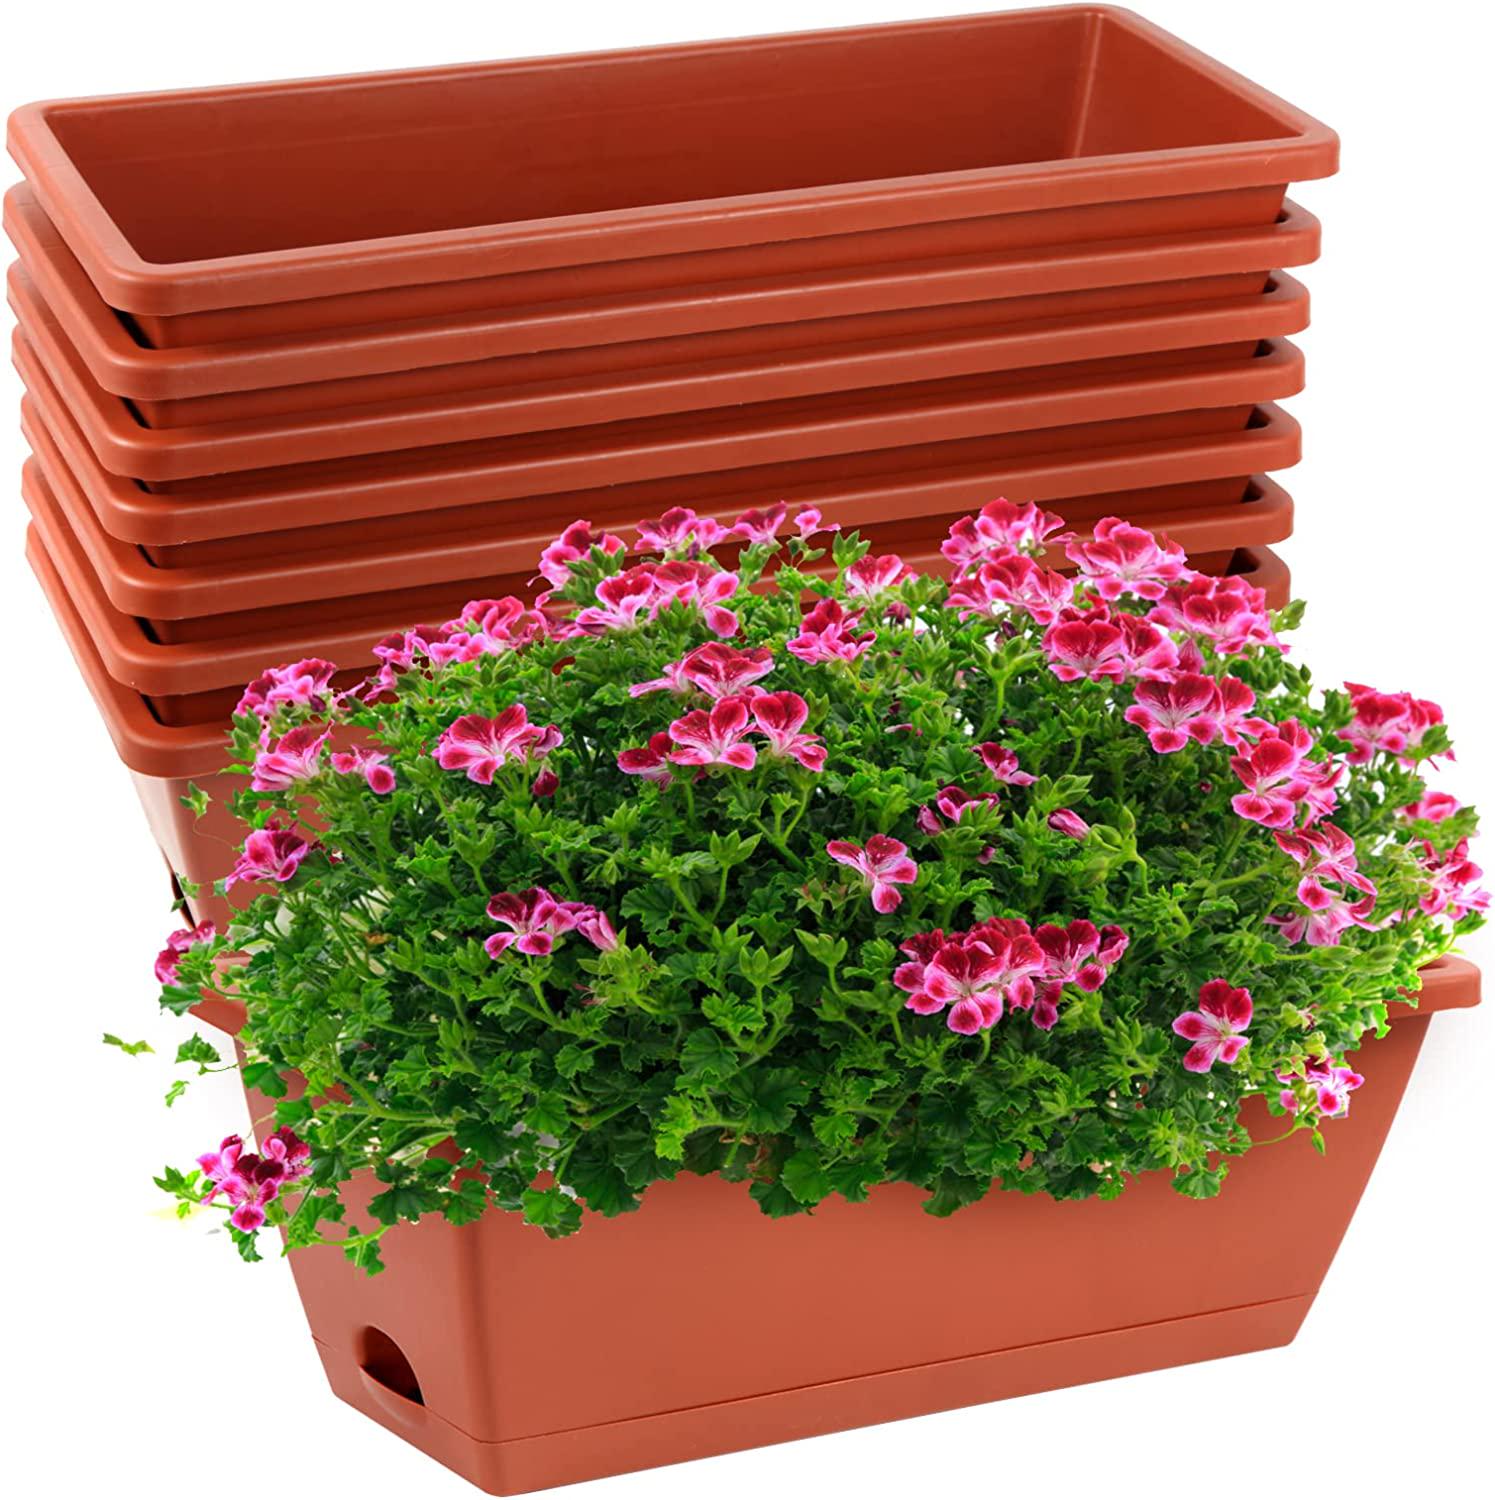 8pcs Window Box Planter,17 Inches Flower Window Boxes, Rectangle Planters Box with Drainage Holes and Trays, Plastic Vegetable Planters for Windowsill Patio Garden Home Decor Porch Yard (Red)-